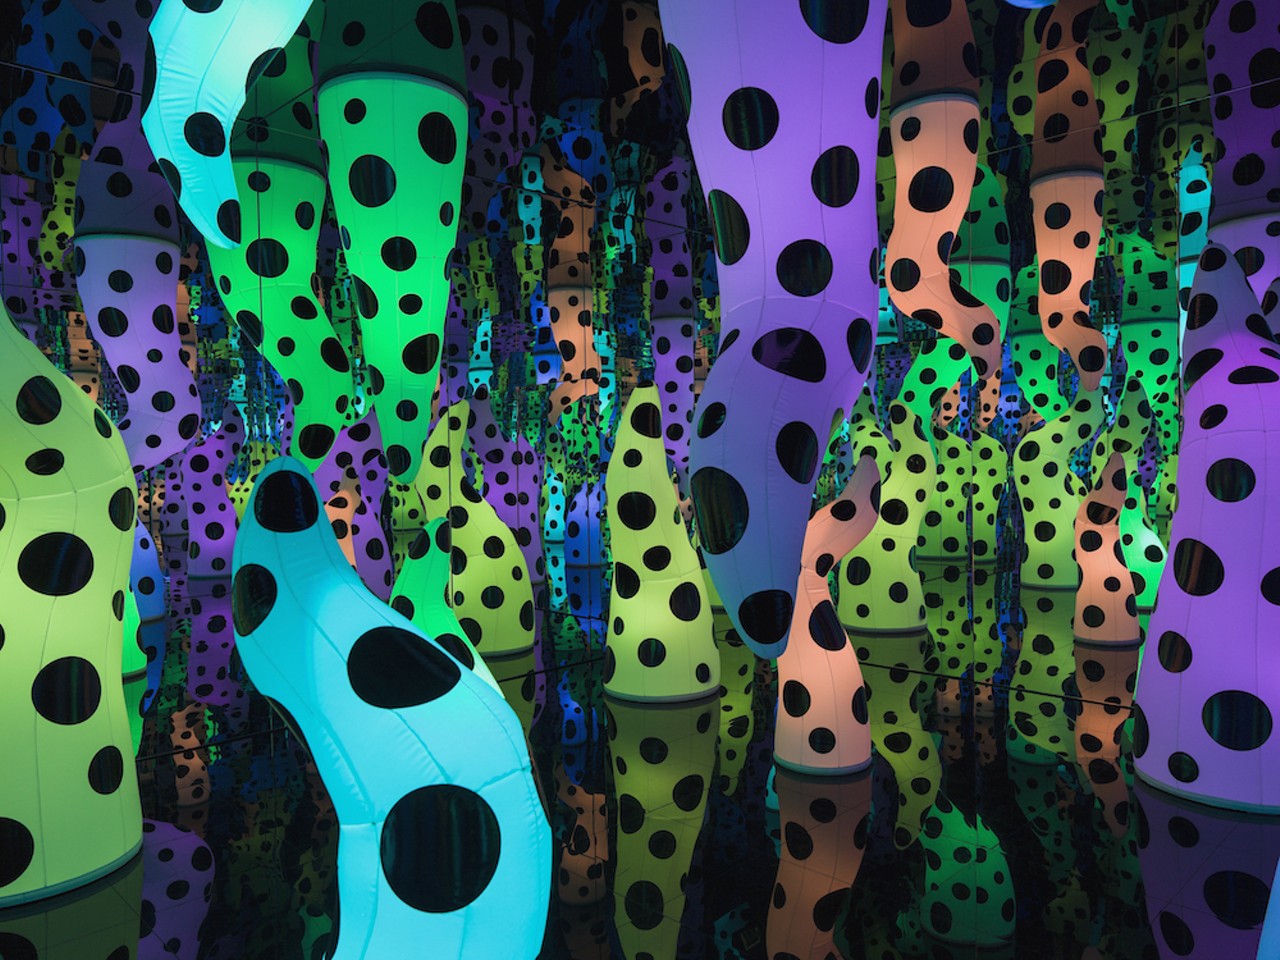 Love is Calling at Tampa Museum of Art
Opens Friday, Sept. 28
Photo via Yayoi Kusama/Tampa Museum of Art